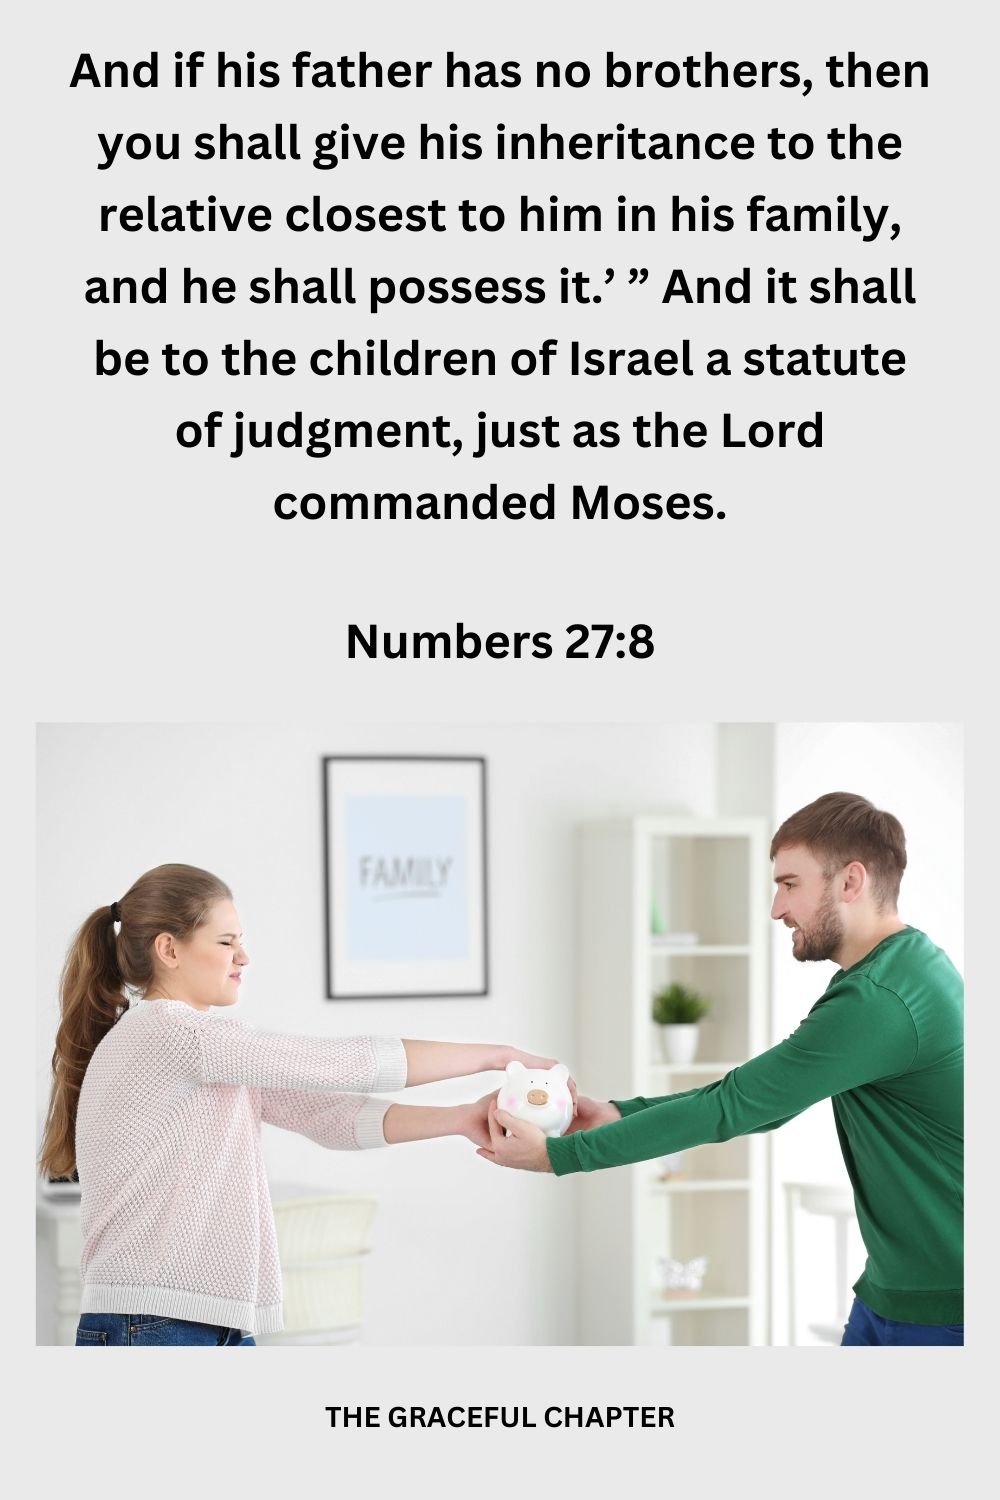 And if his father has no brothers, then you shall give his inheritance to the relative closest to him in his family, and he shall possess it.’ ” And it shall be to the children of Israel a statute of judgment, just as the Lord commanded Moses. Numbers 27:11